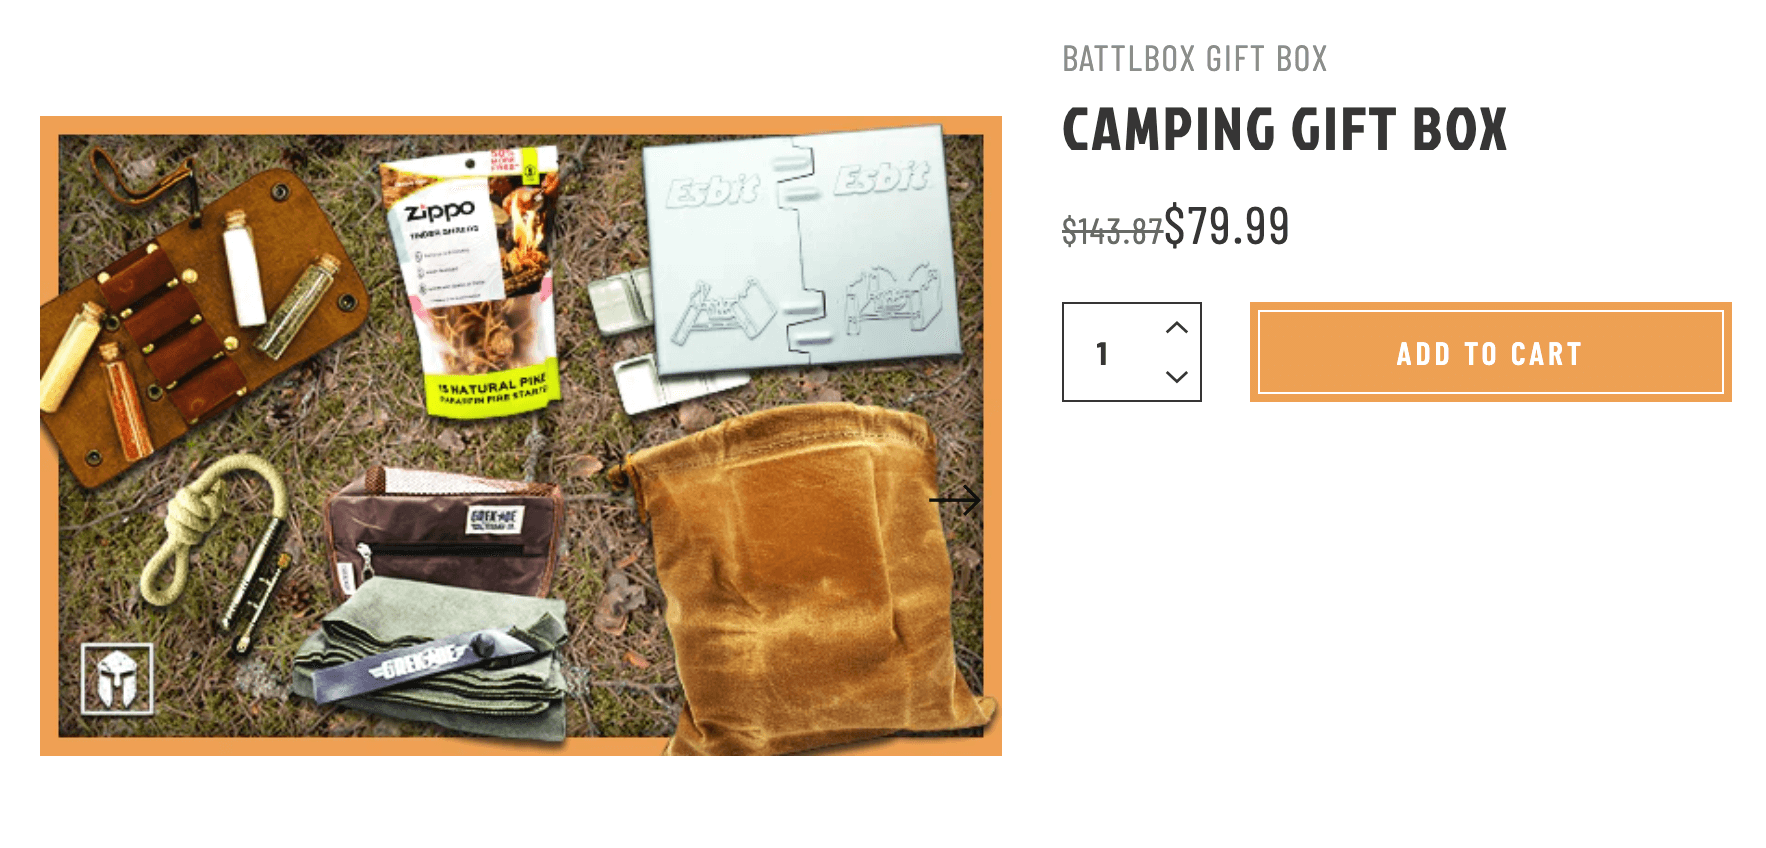 Battlbox's offering of a Camping Gift Box for $79.99 with an array of outdoor tools.